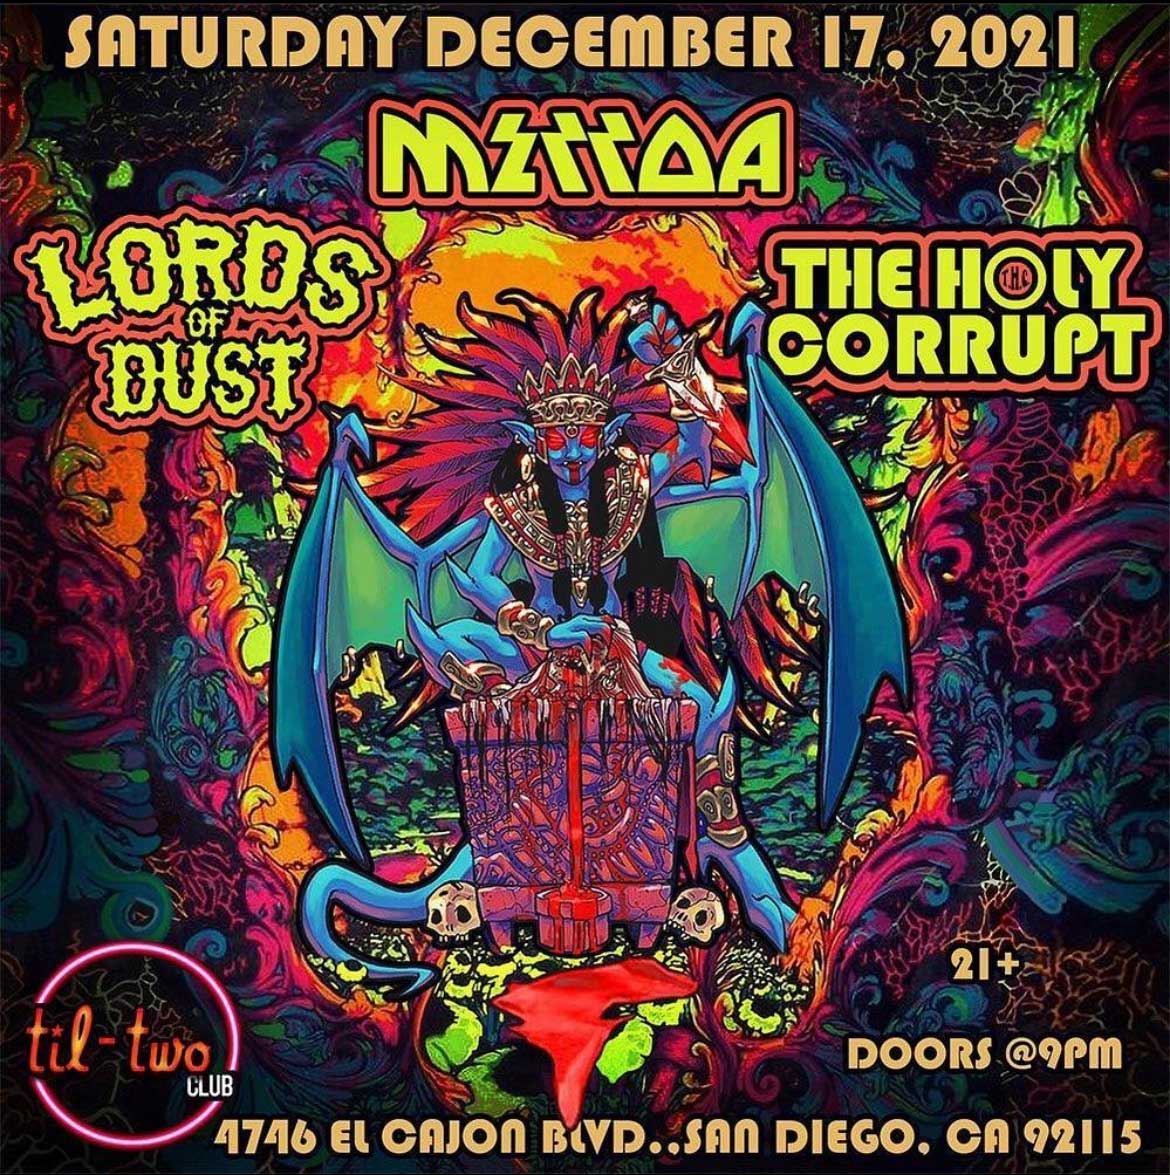 Lords of Death at Til-Two, San Diego, CA December 17, 2021